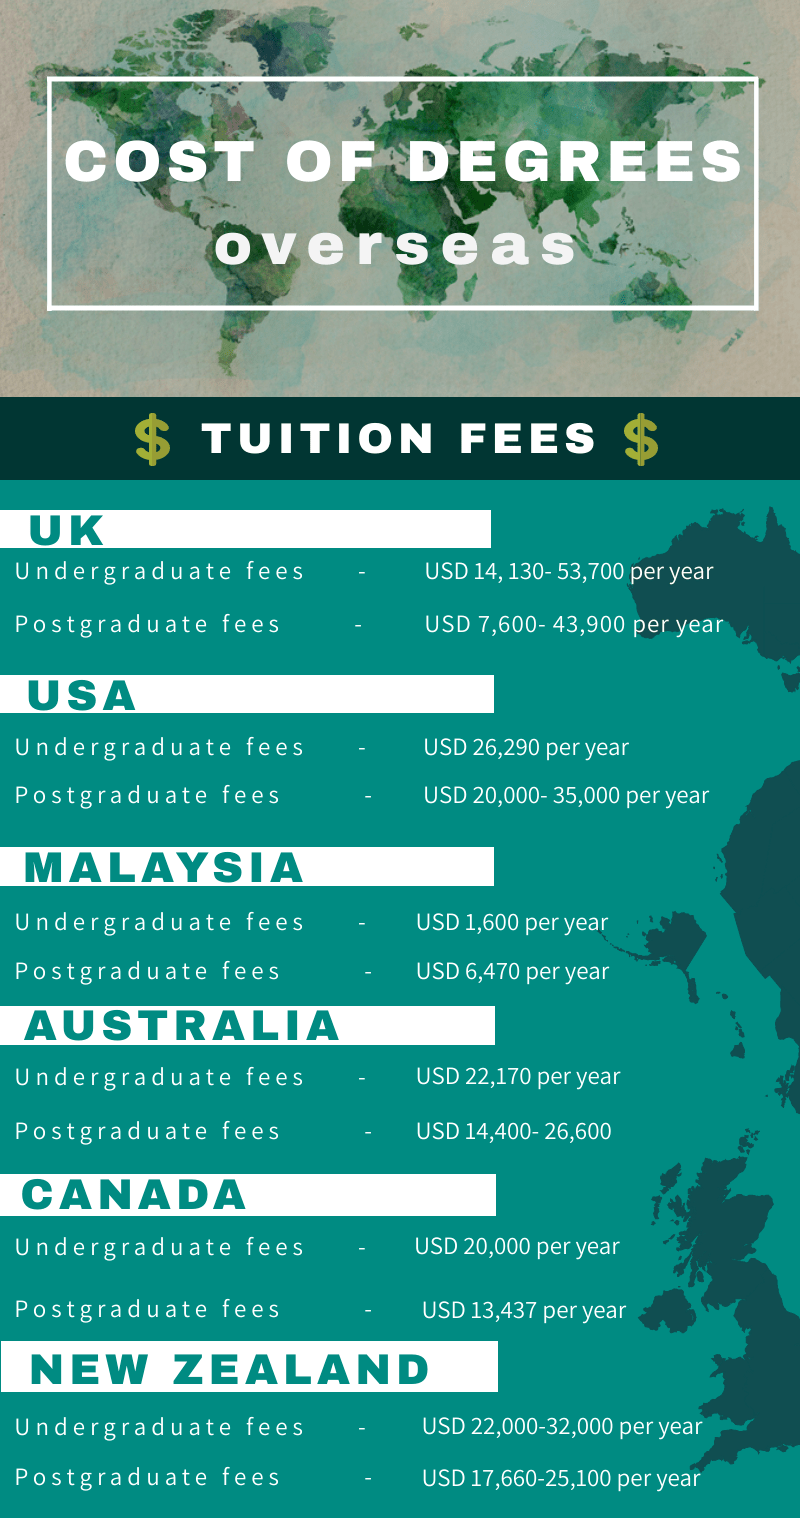 Comparing the cost of degrees overseas